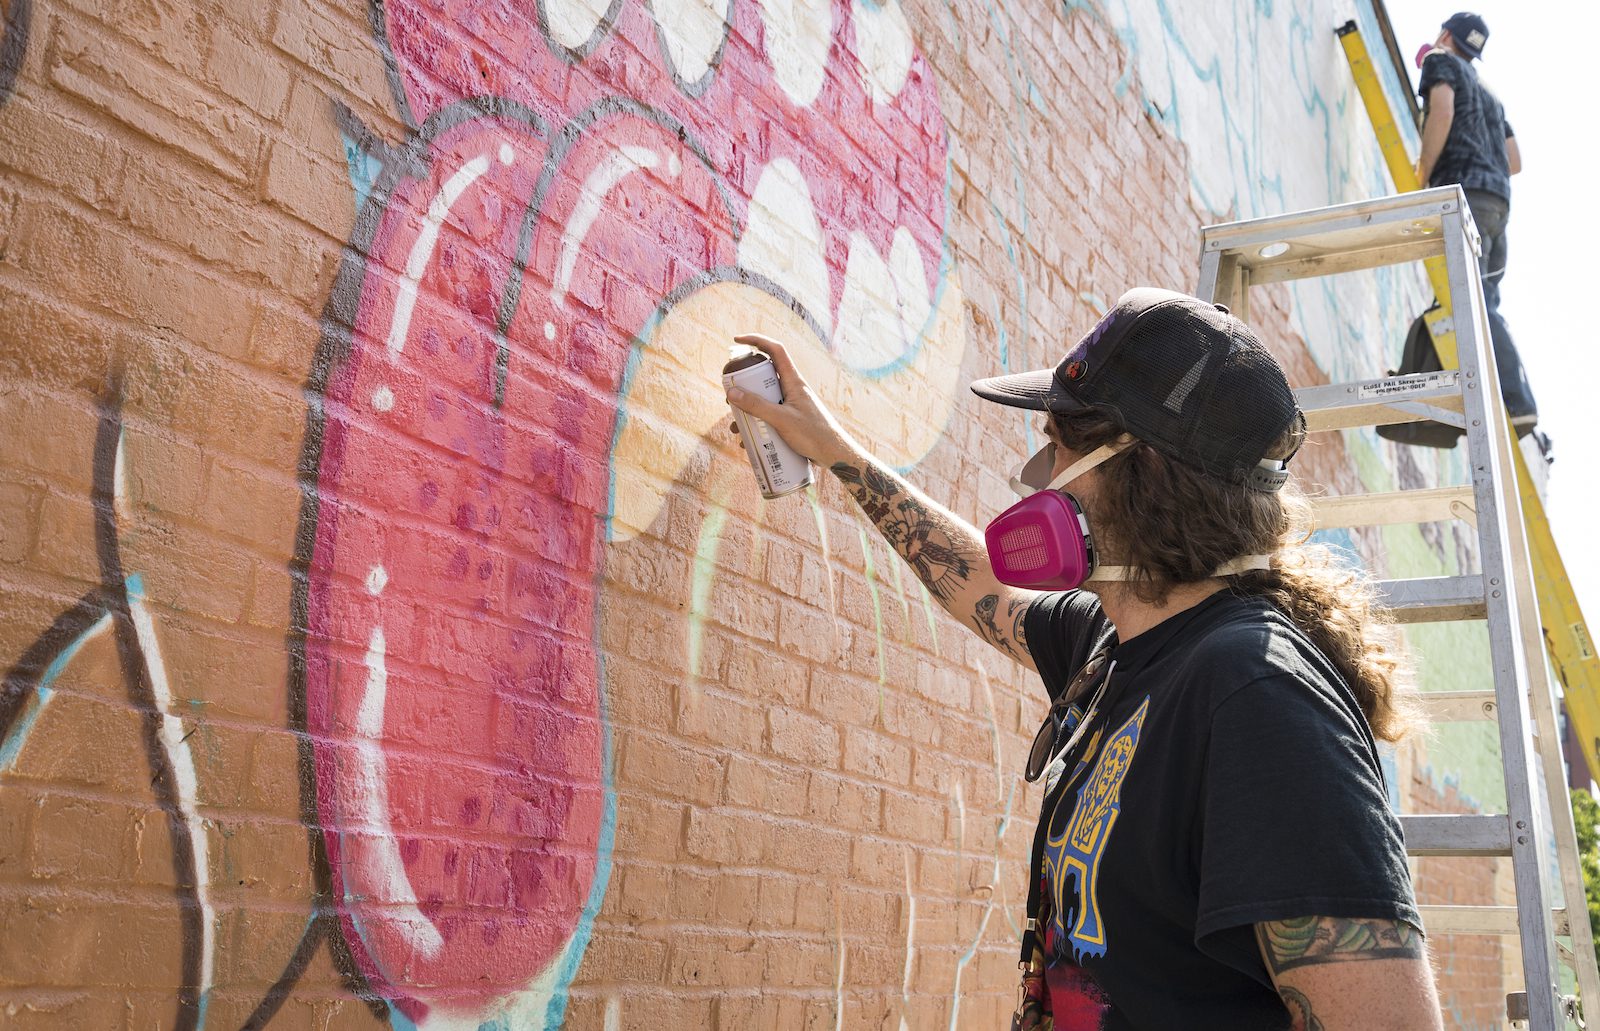 Artist Tallboy adds details to the mouth of the monster in his and Brian Denahy's mural on Washington Street.